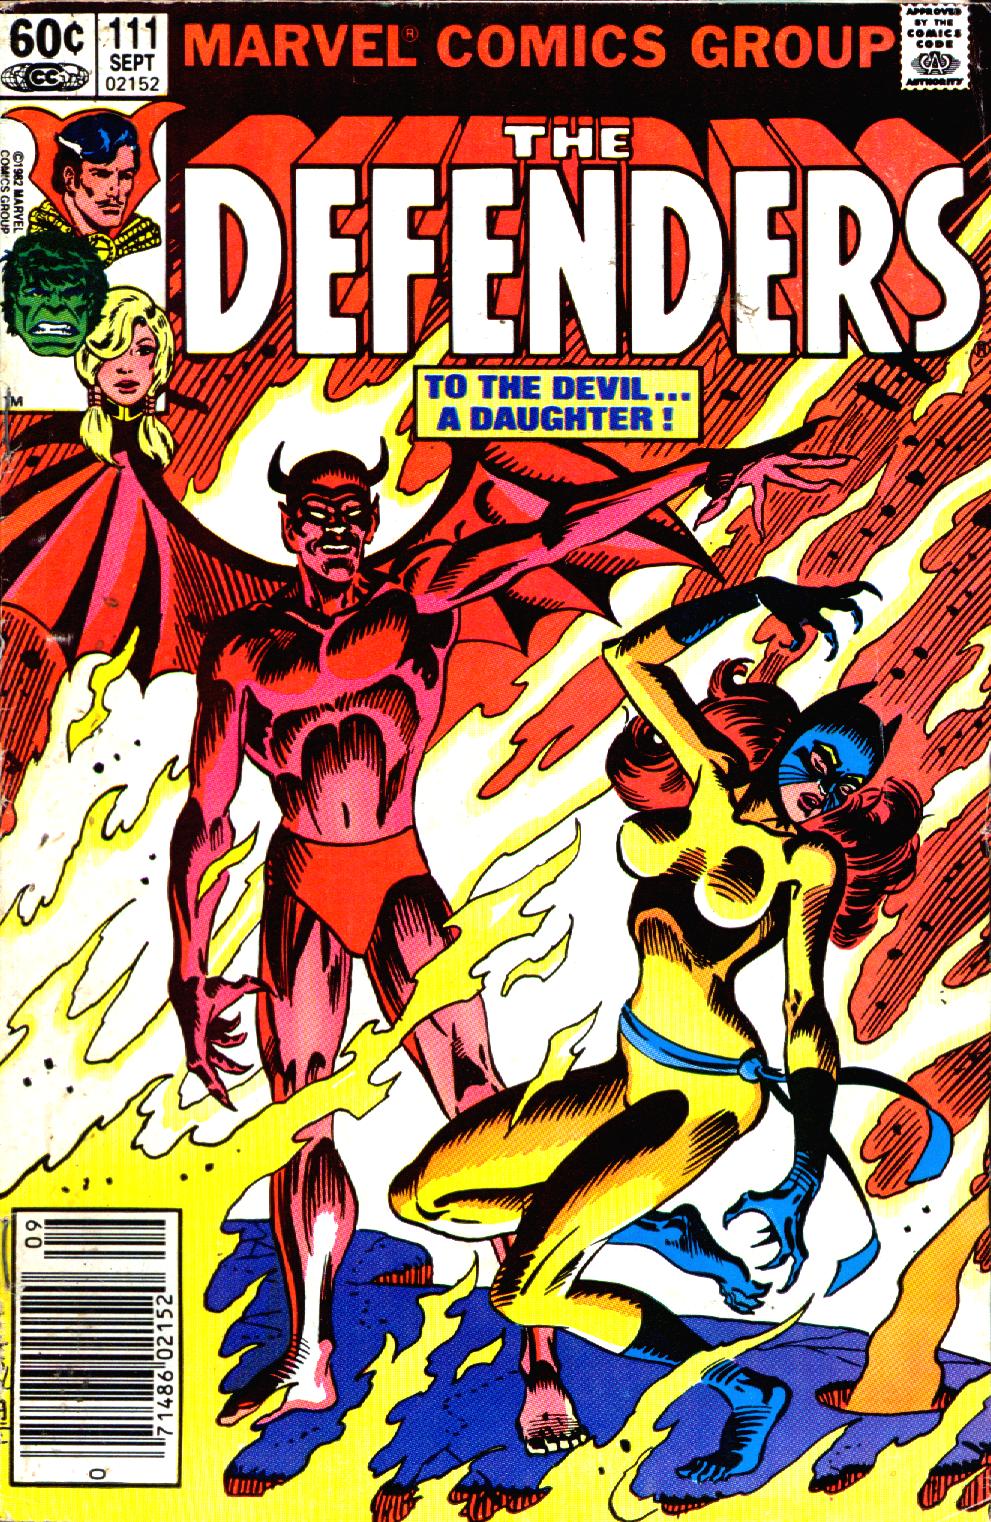 The Defenders (1972) Issue #111 #112 - English 1